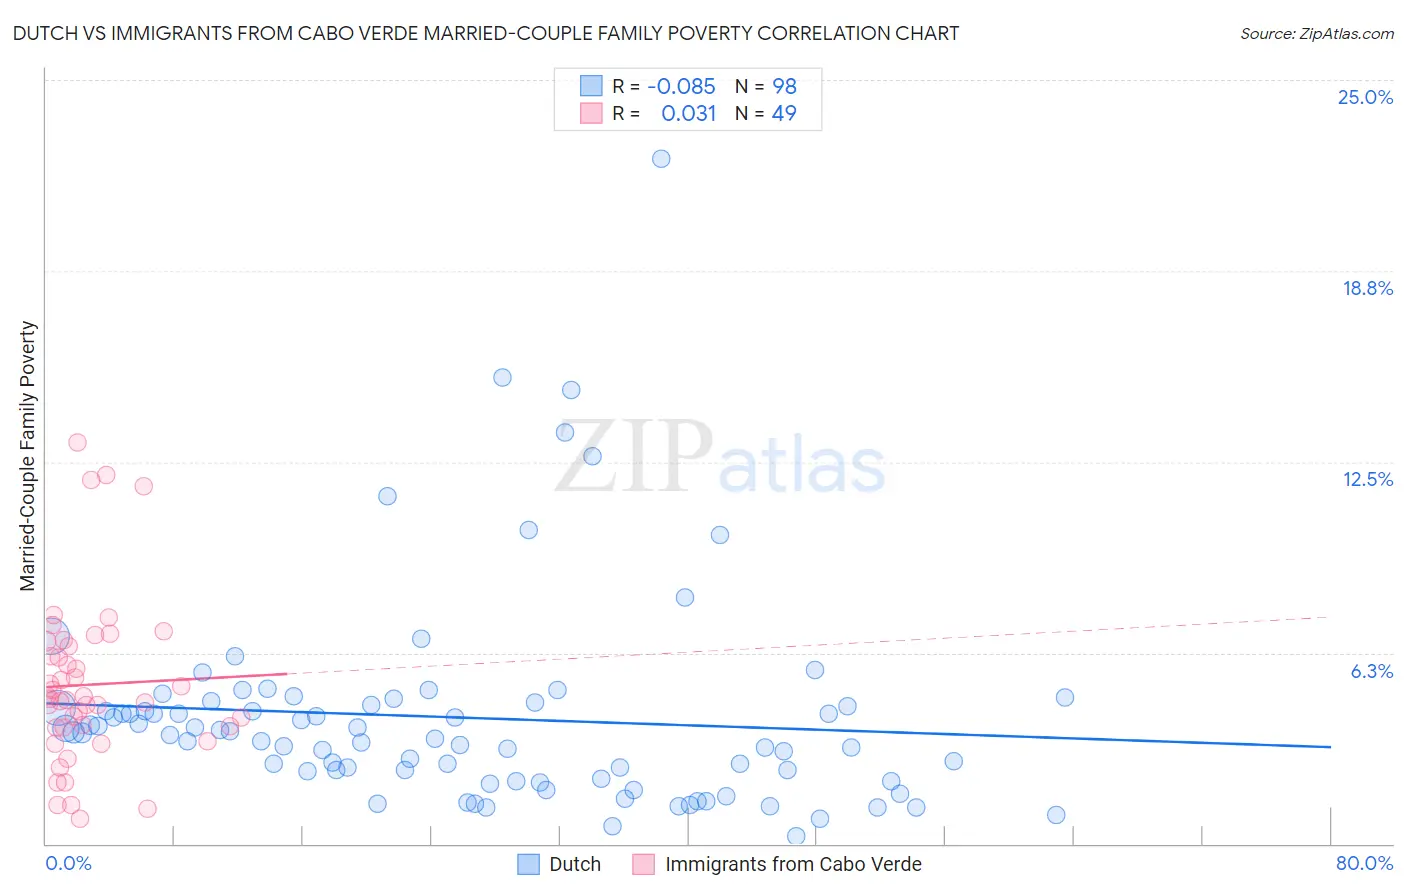 Dutch vs Immigrants from Cabo Verde Married-Couple Family Poverty